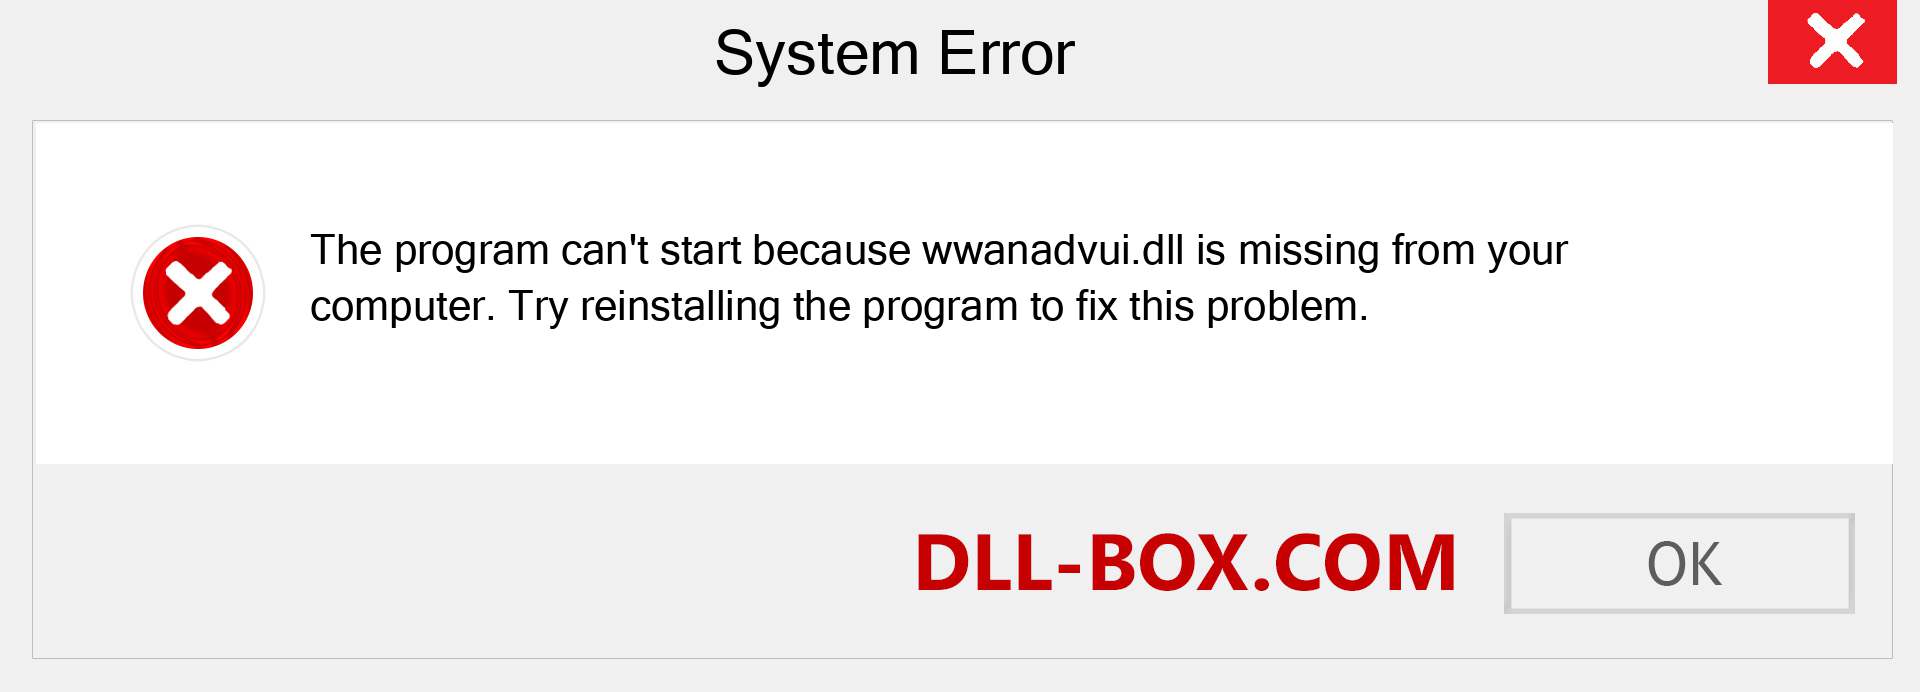  wwanadvui.dll file is missing?. Download for Windows 7, 8, 10 - Fix  wwanadvui dll Missing Error on Windows, photos, images